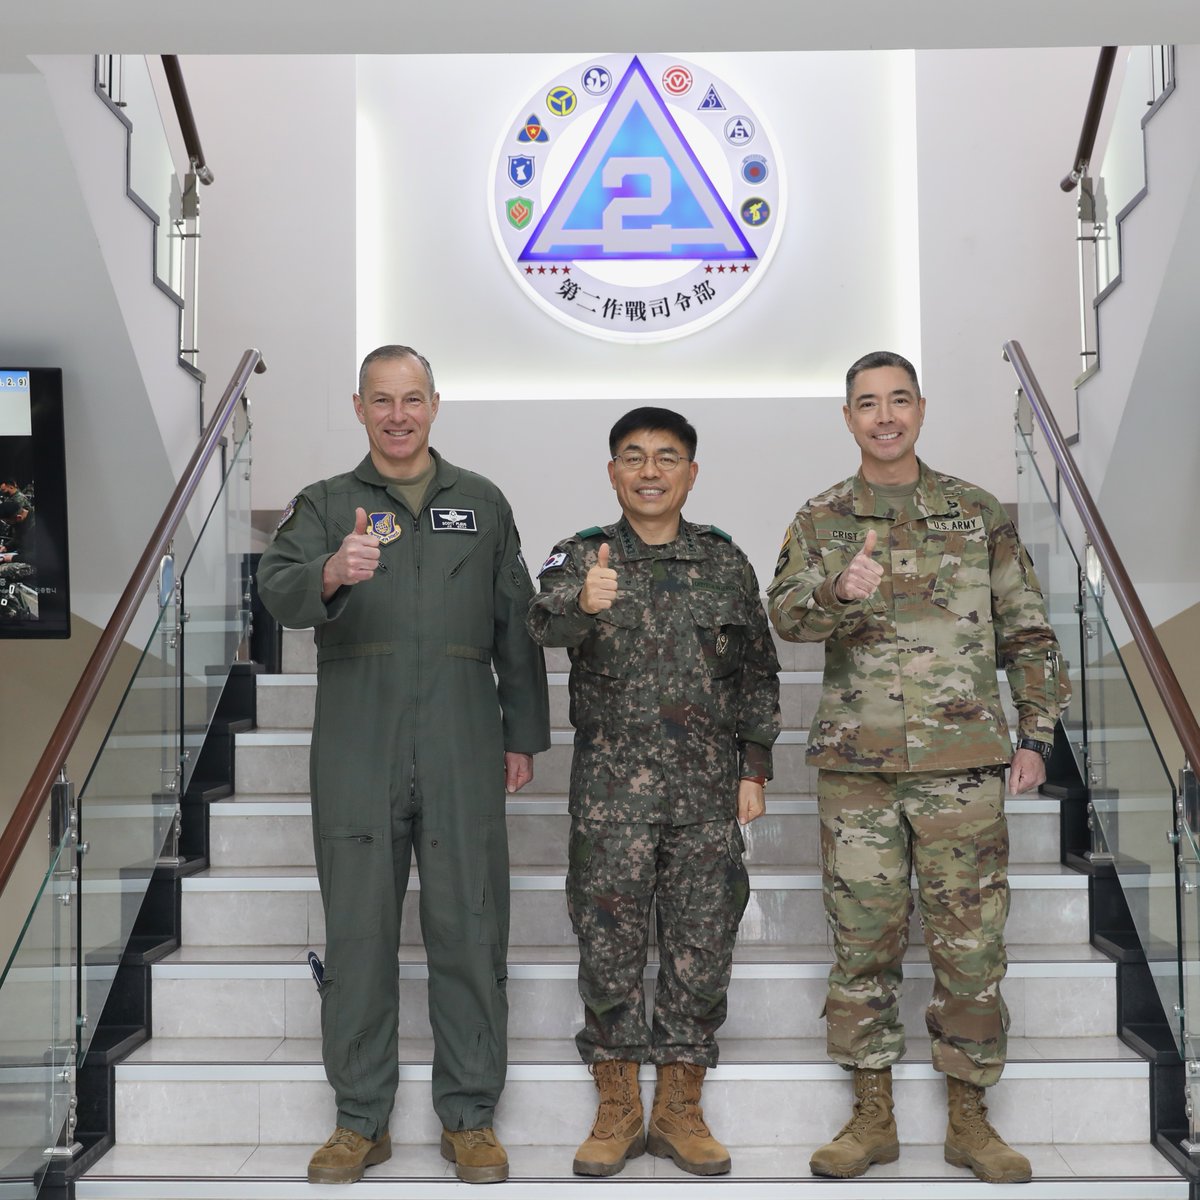 Interoperability on the ground and in the air... 
Commanders of Korea Army's 2nd Operational Command, U.S. 7th Air Force, and 19th Expeditionary Sustainment Command hold office call at 2OC HQ's in Daegu, Republic of Korea. #WeGoTogether #EverySoldierCounts